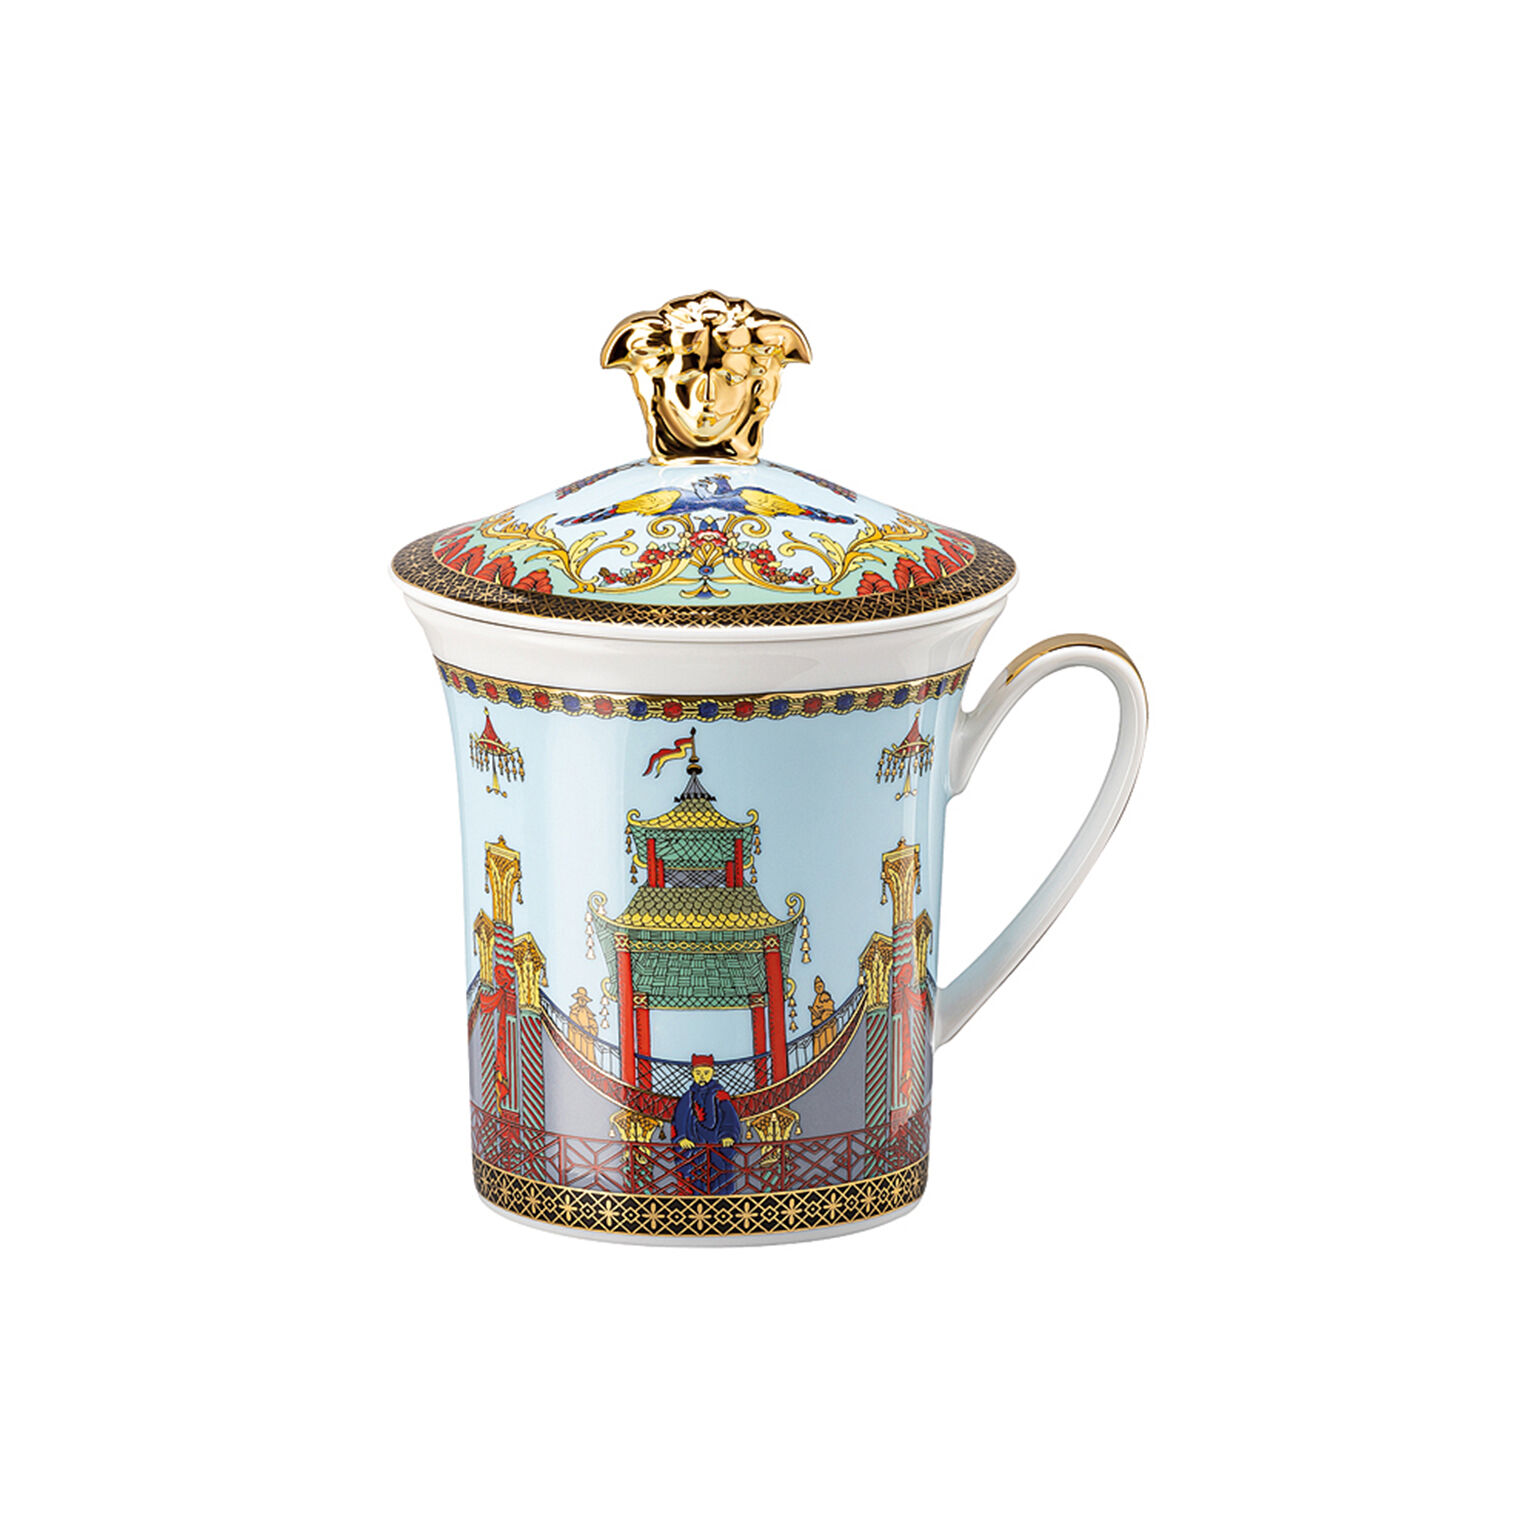 https://www.rosenthal.de/dw/image/v2/BGMT_PRD/on/demandware.static/-/Library-Sites-ros-library-shared/default/dwb64600c1/Versace/VS%20Limited/30%20yrs%20Mug%20Collection/1993_marco-polo_1536x1536.jpg